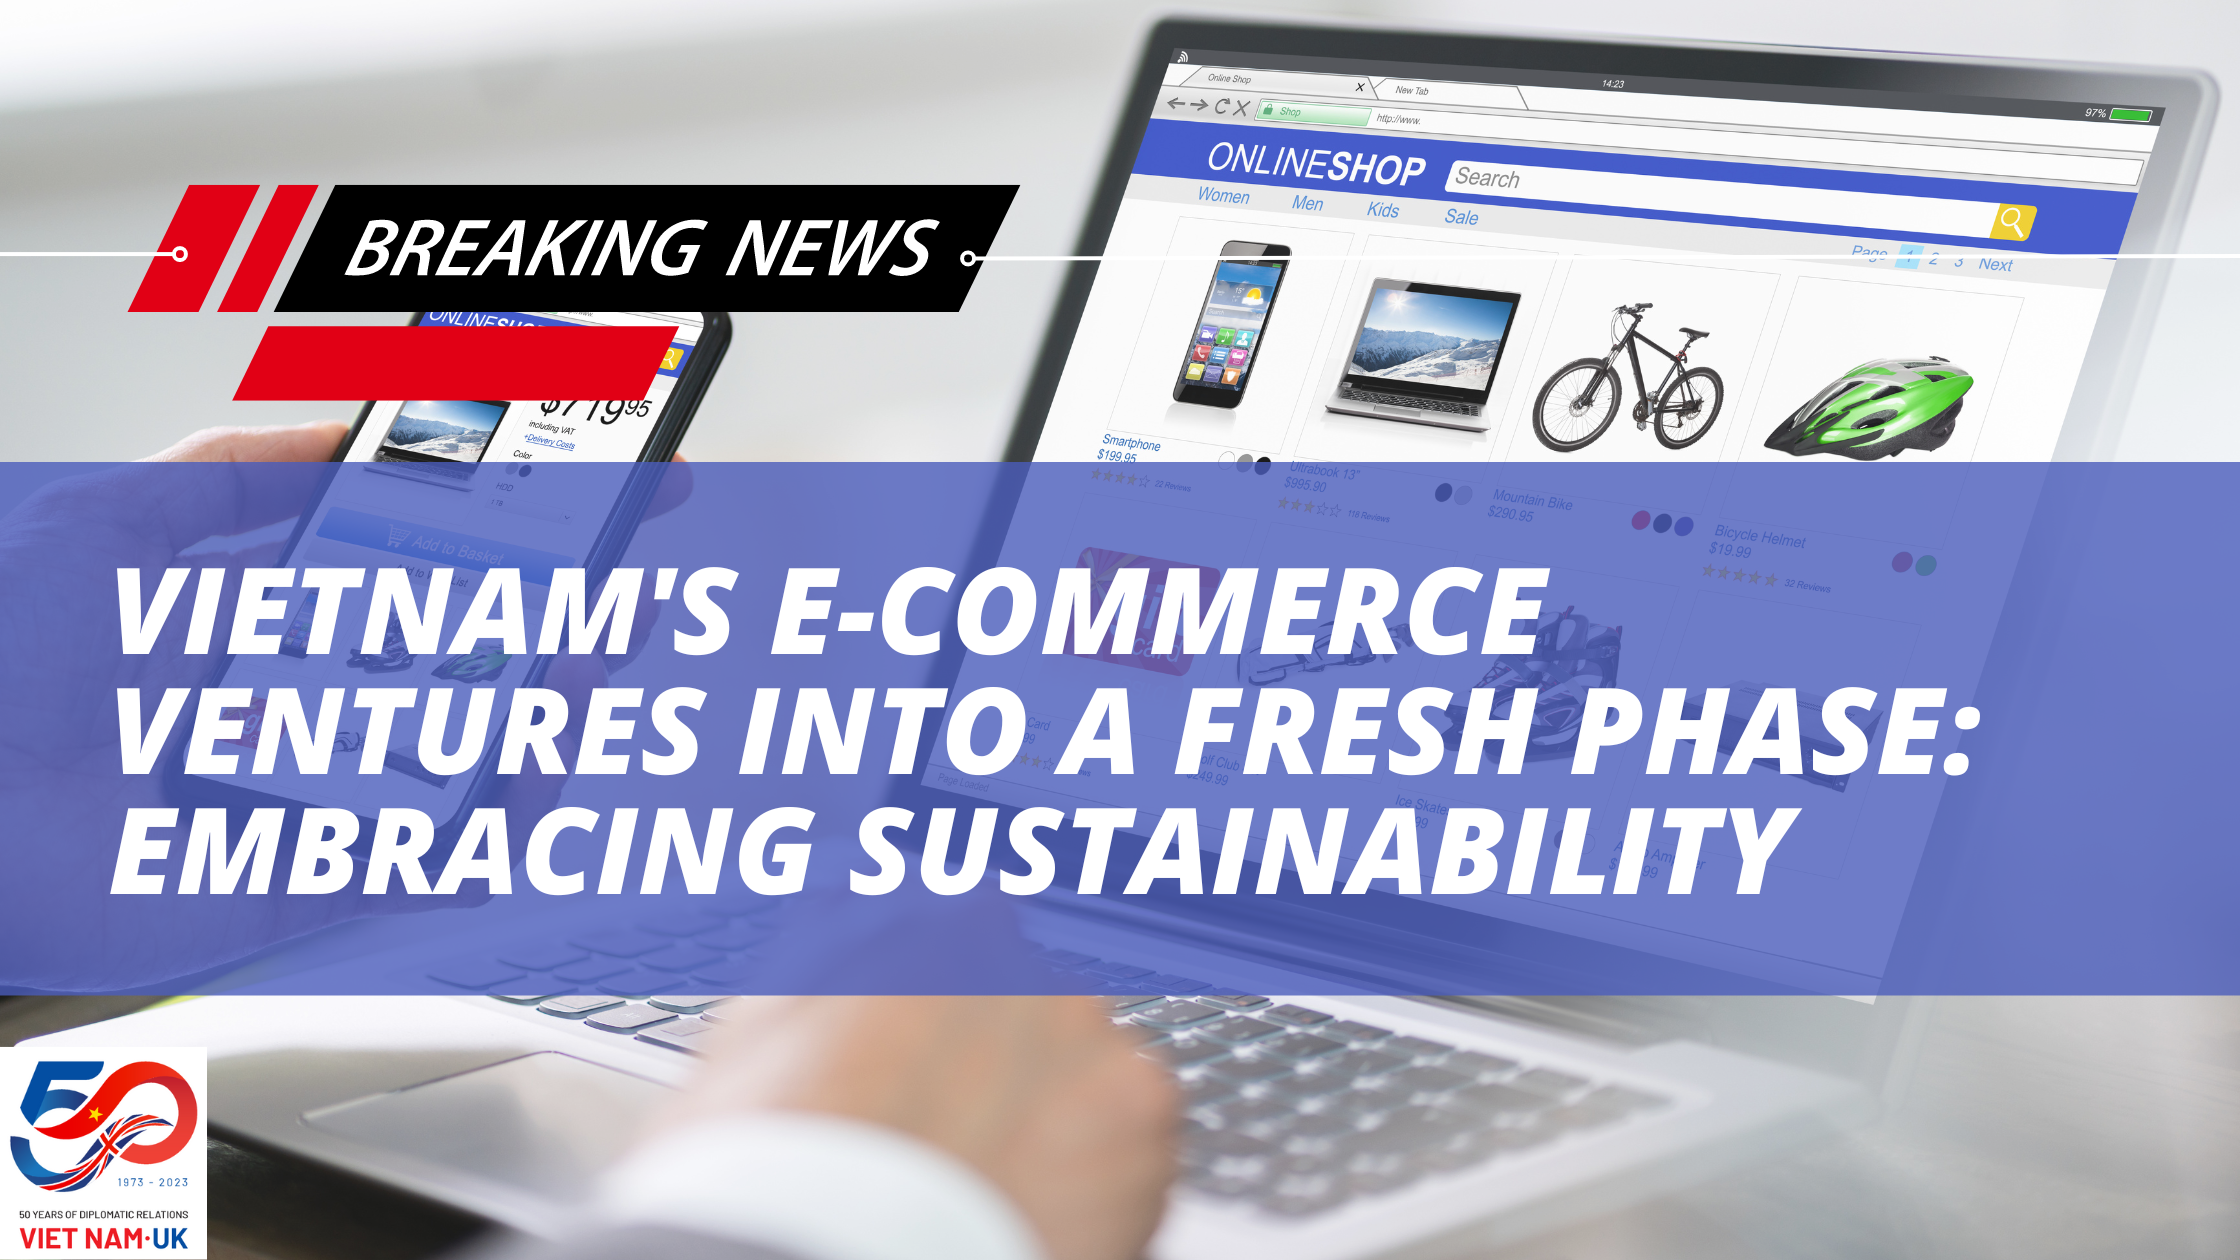 Vietnam’s E-commerce Ventures into a Fresh Phase: Embracing Sustainability